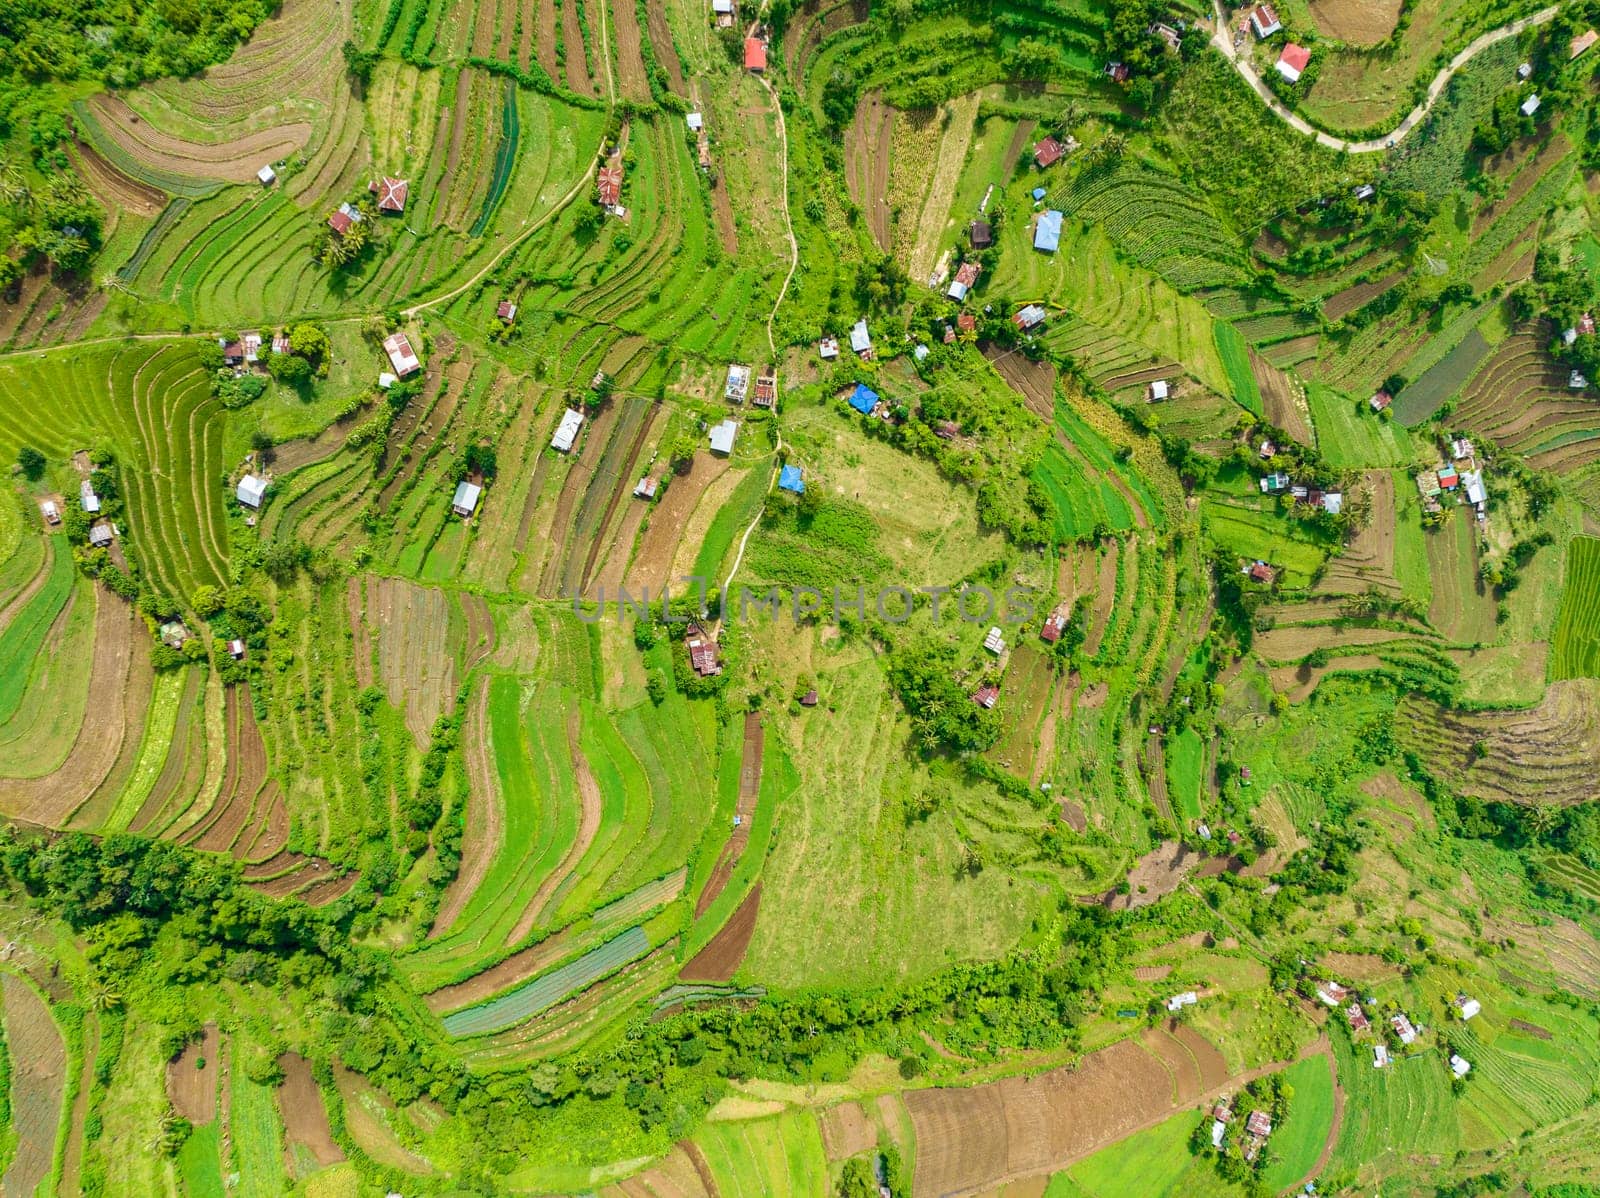 Farmland in the Philippines. by Alexpunker